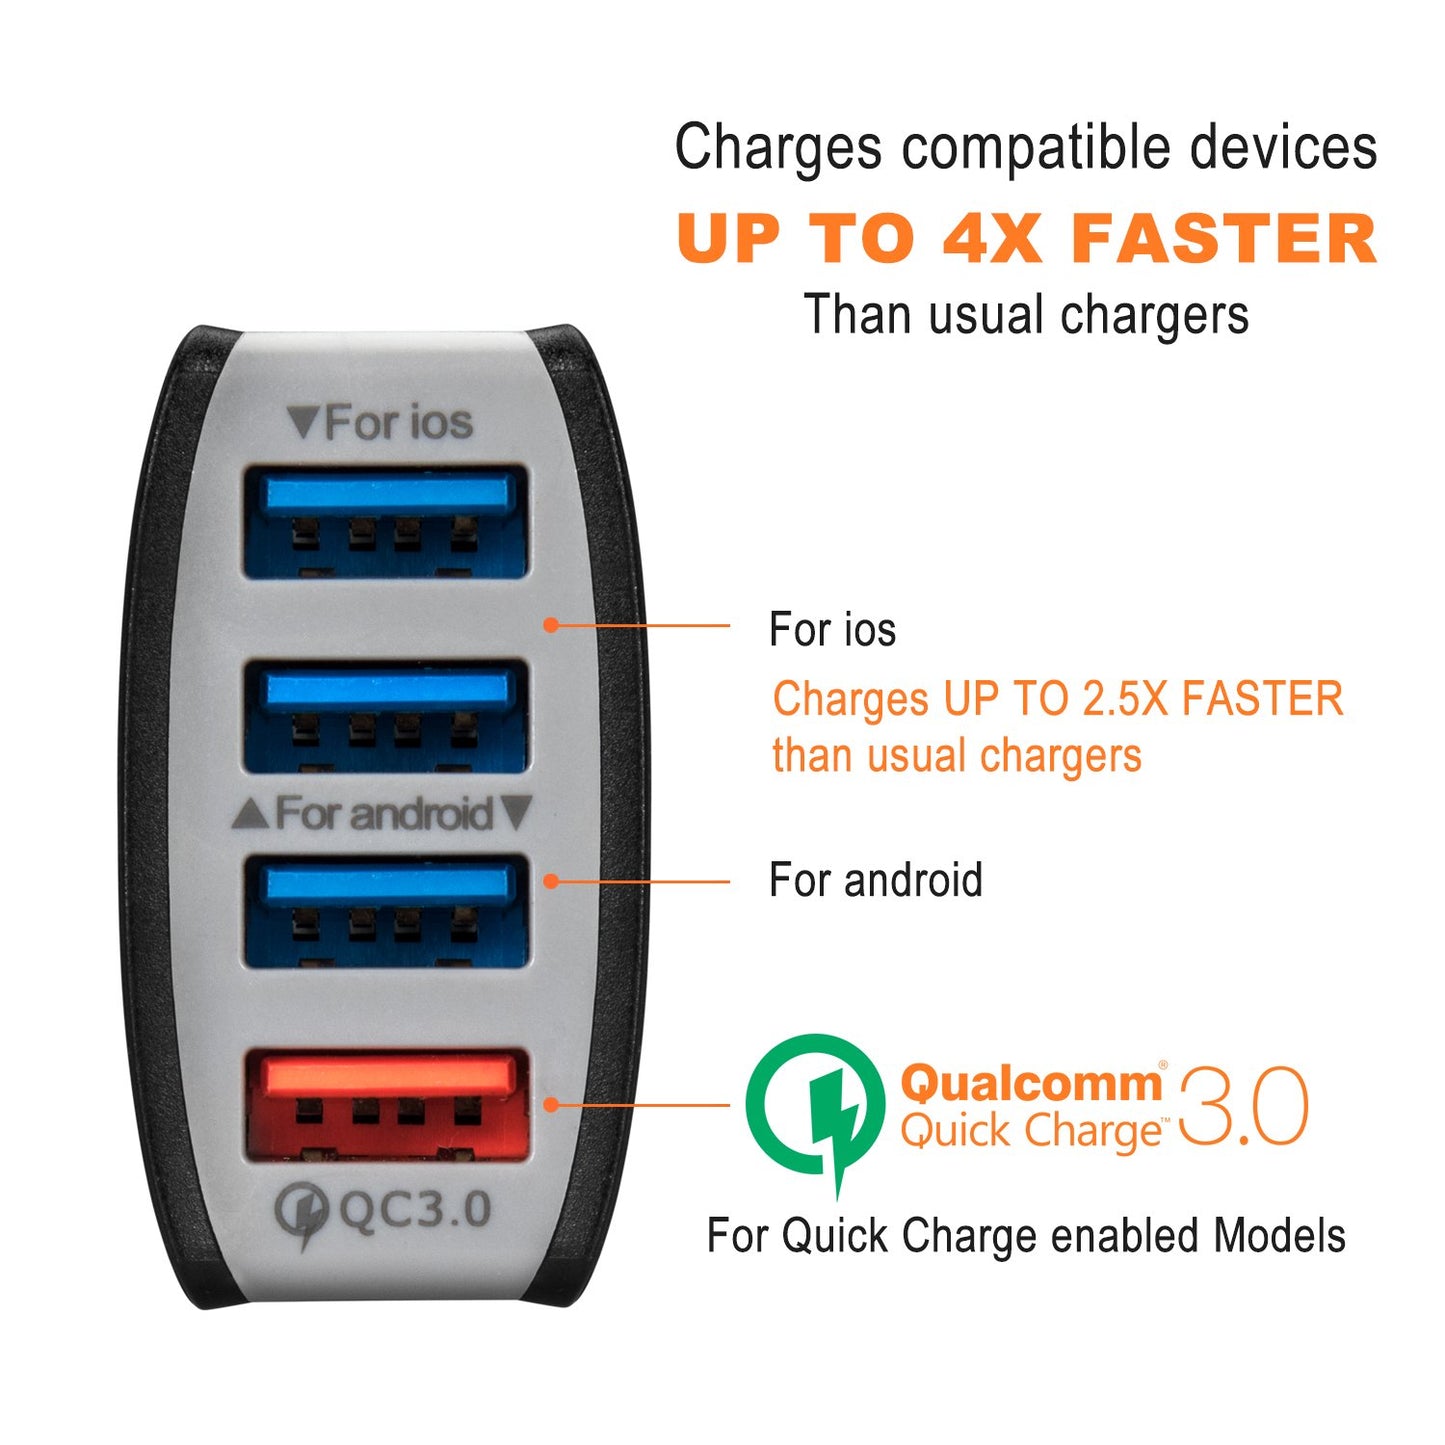 EYUVAA 4 Ports Car Charger 36W Quick Charge 3.0 USB Fast Adapter QC 3.0 (Black)